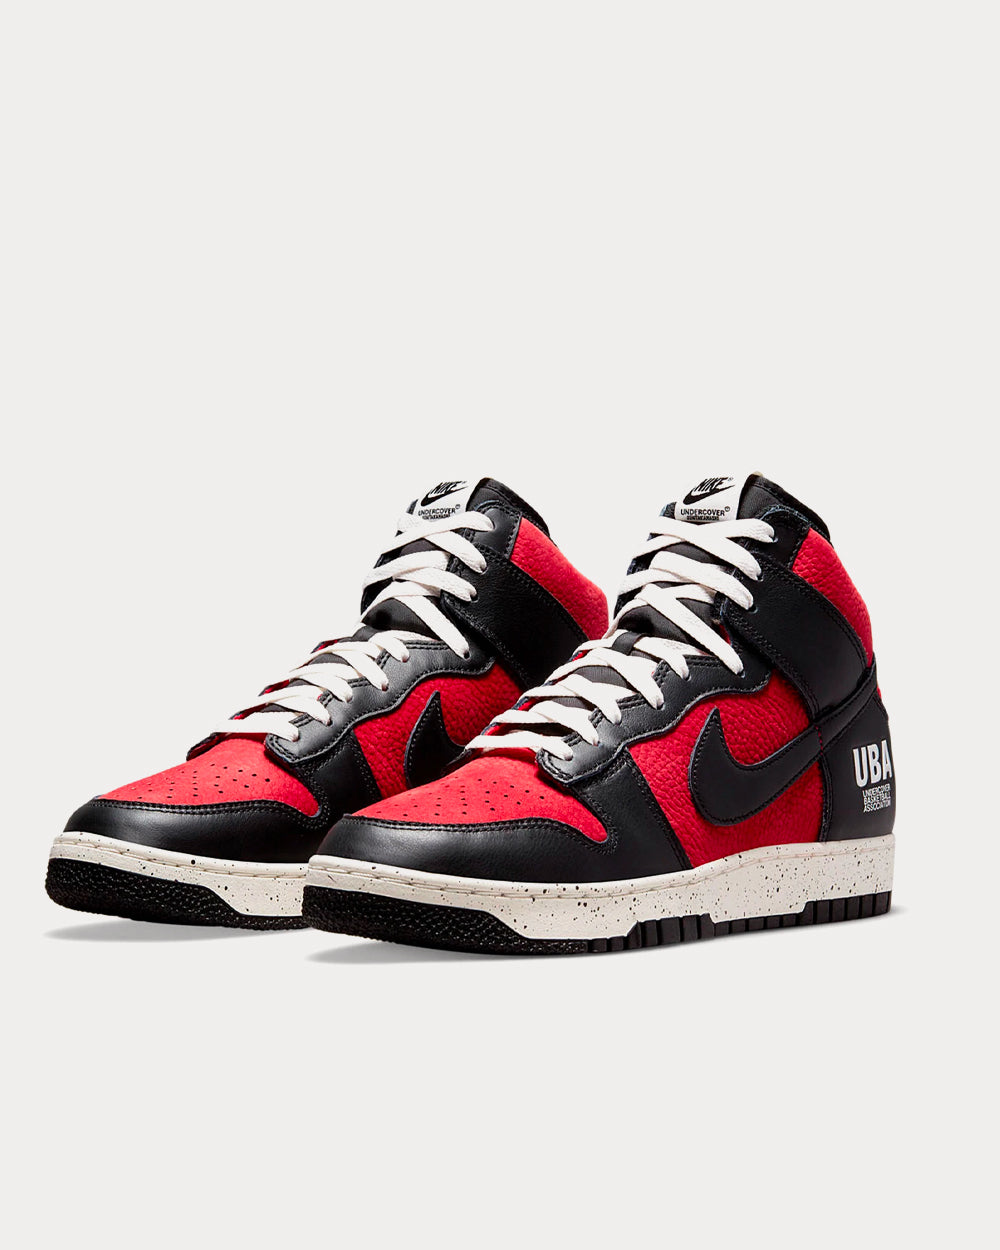 Nike x Undercover - Dunk Hi 1985 Gym Red / Black High Top Sneakers